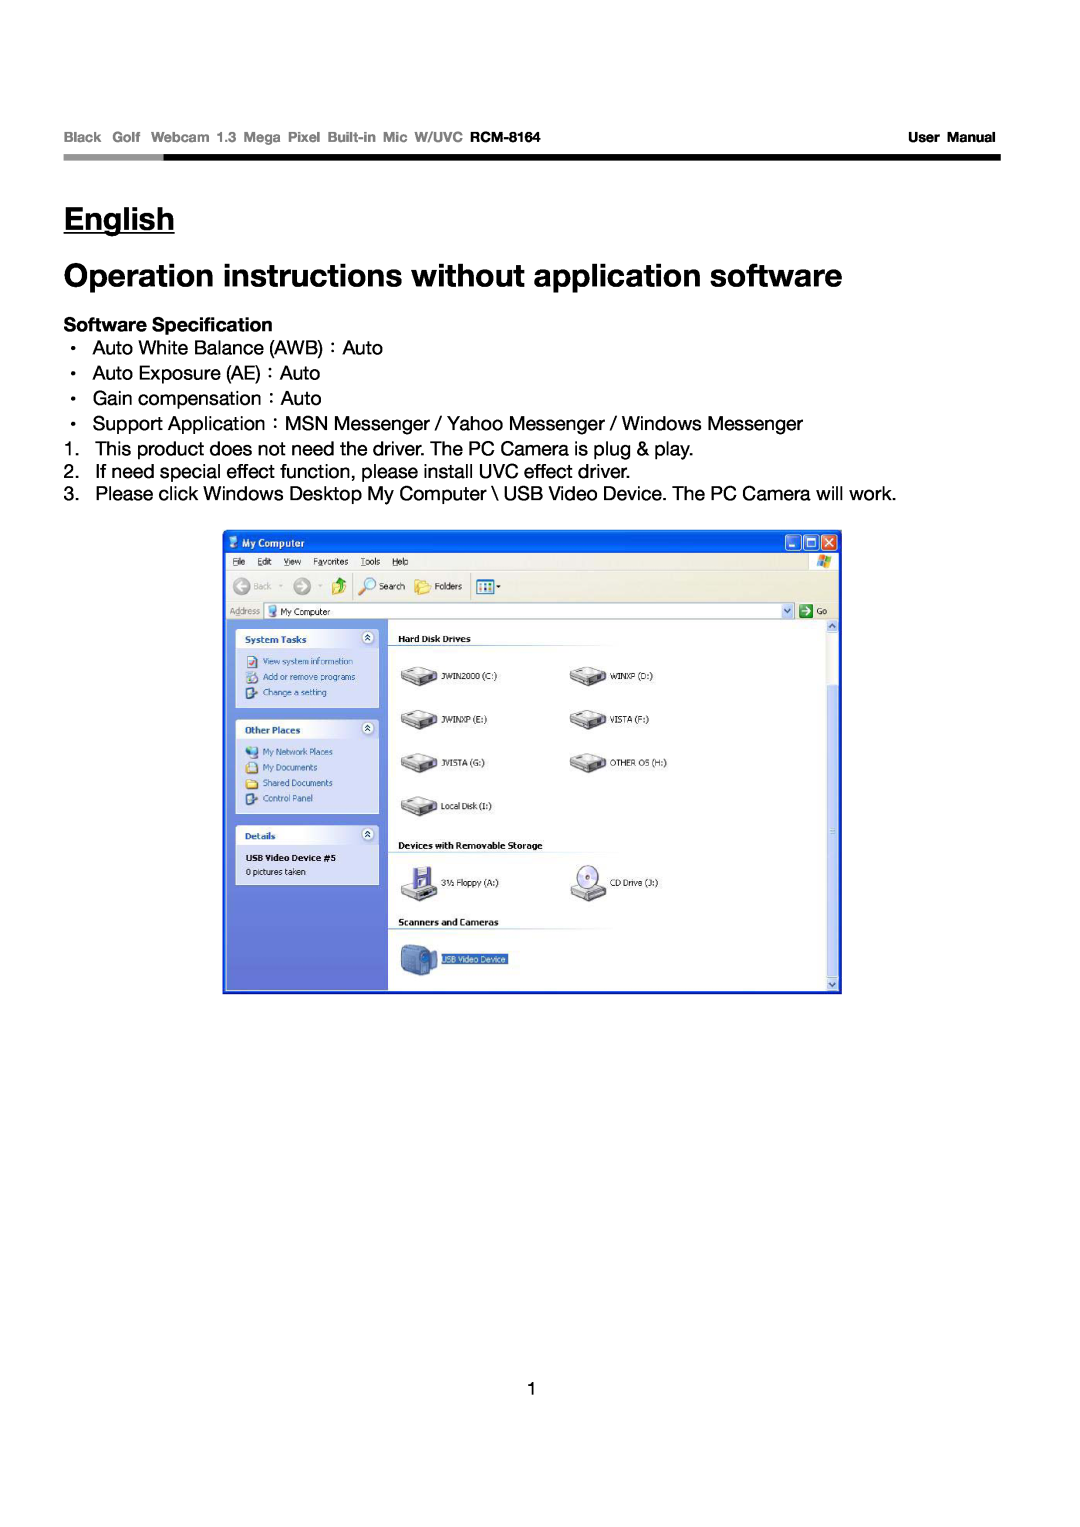 Rosewill RCM-8164 user manual English Operation instructions without application software, Software Specification 